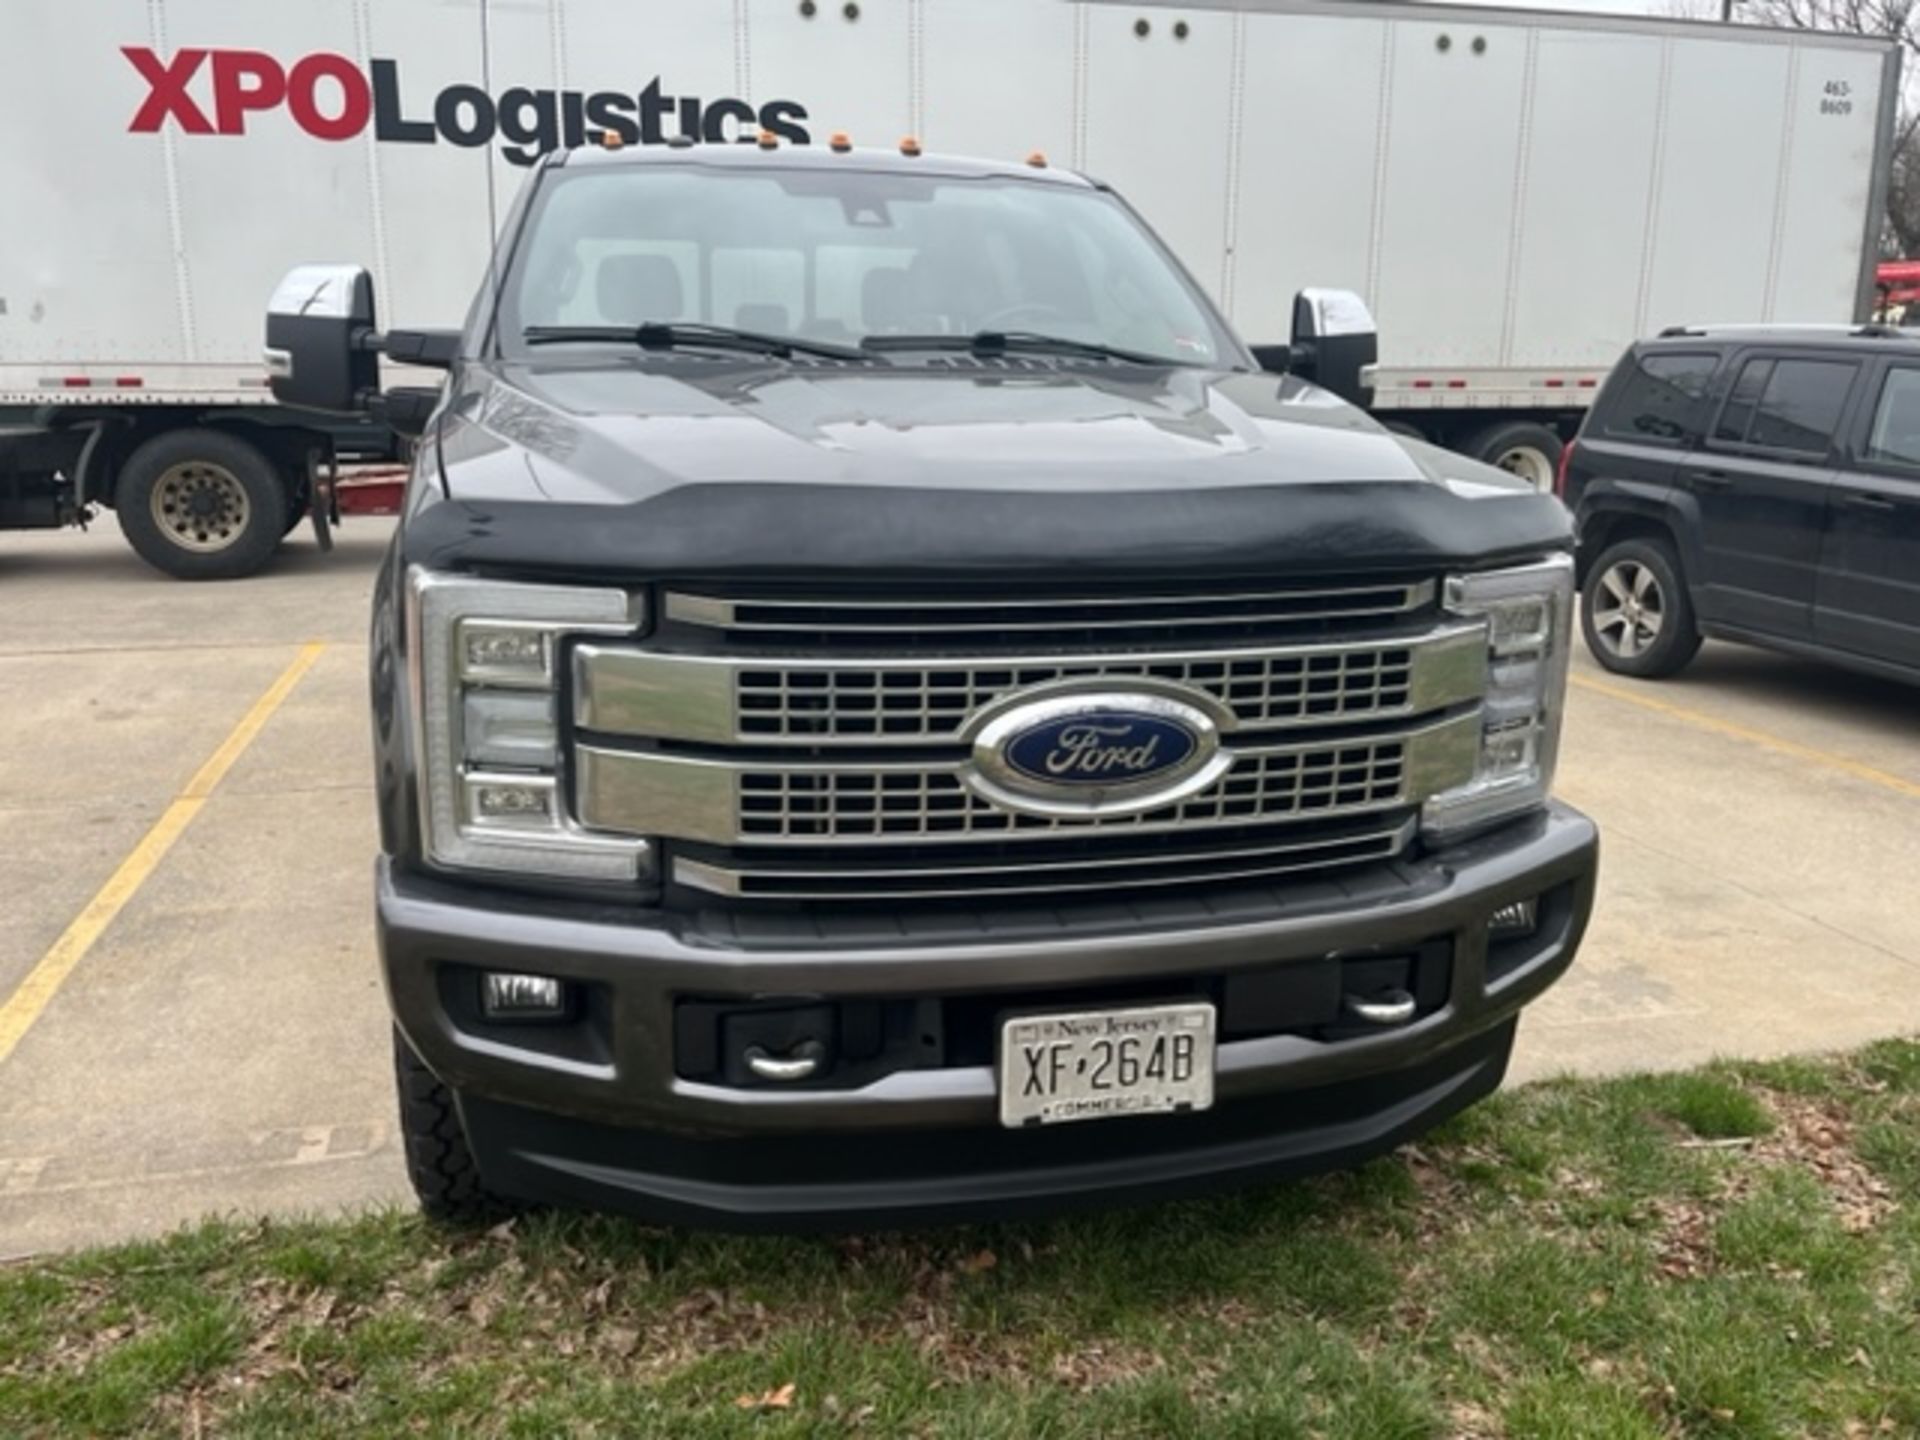 2017 Ford F250 Platinum (EH111) - Image 2 of 10